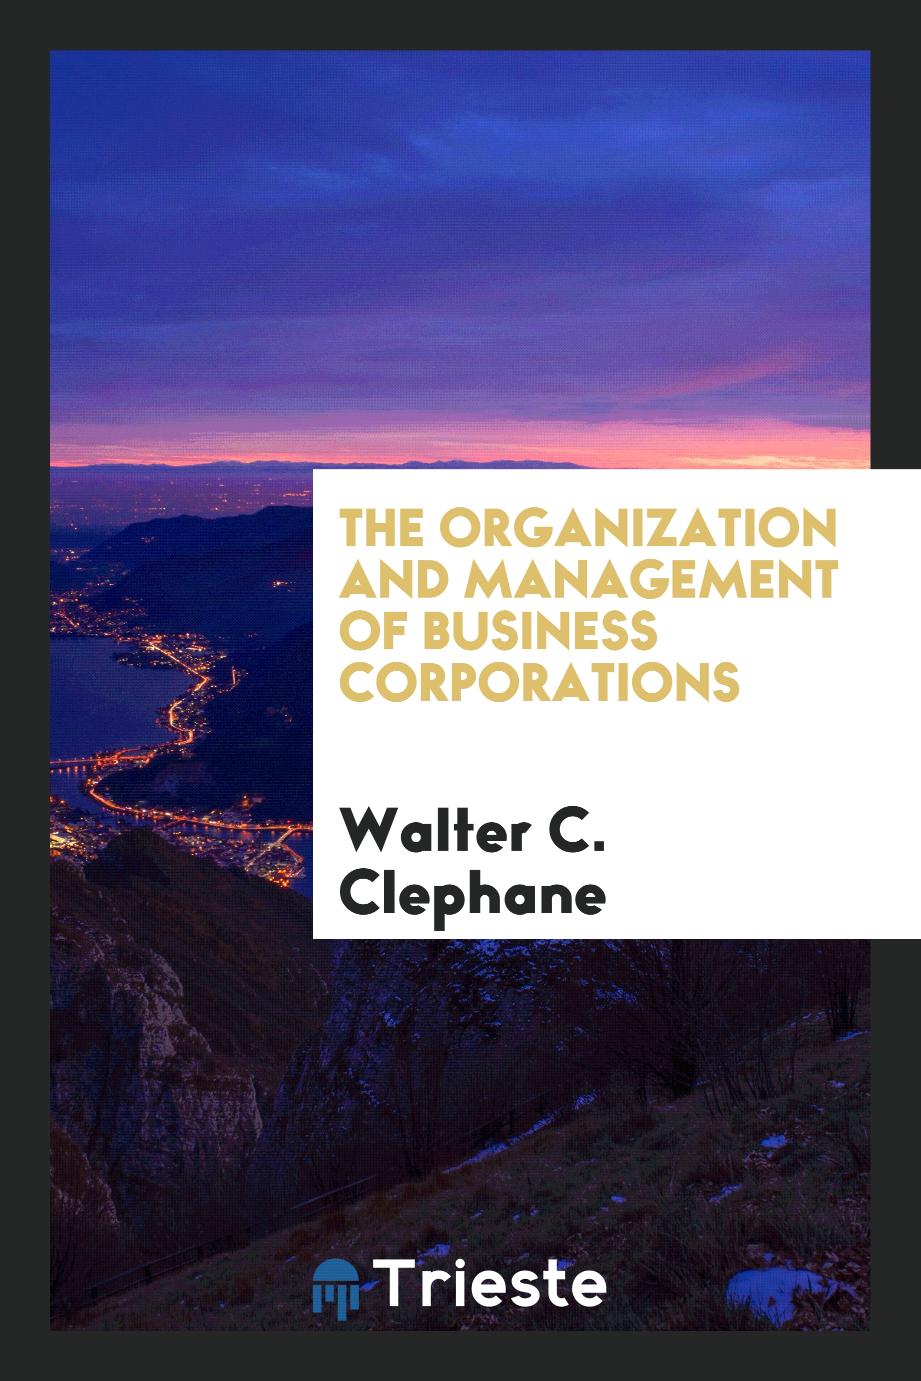 The organization and management of business corporations